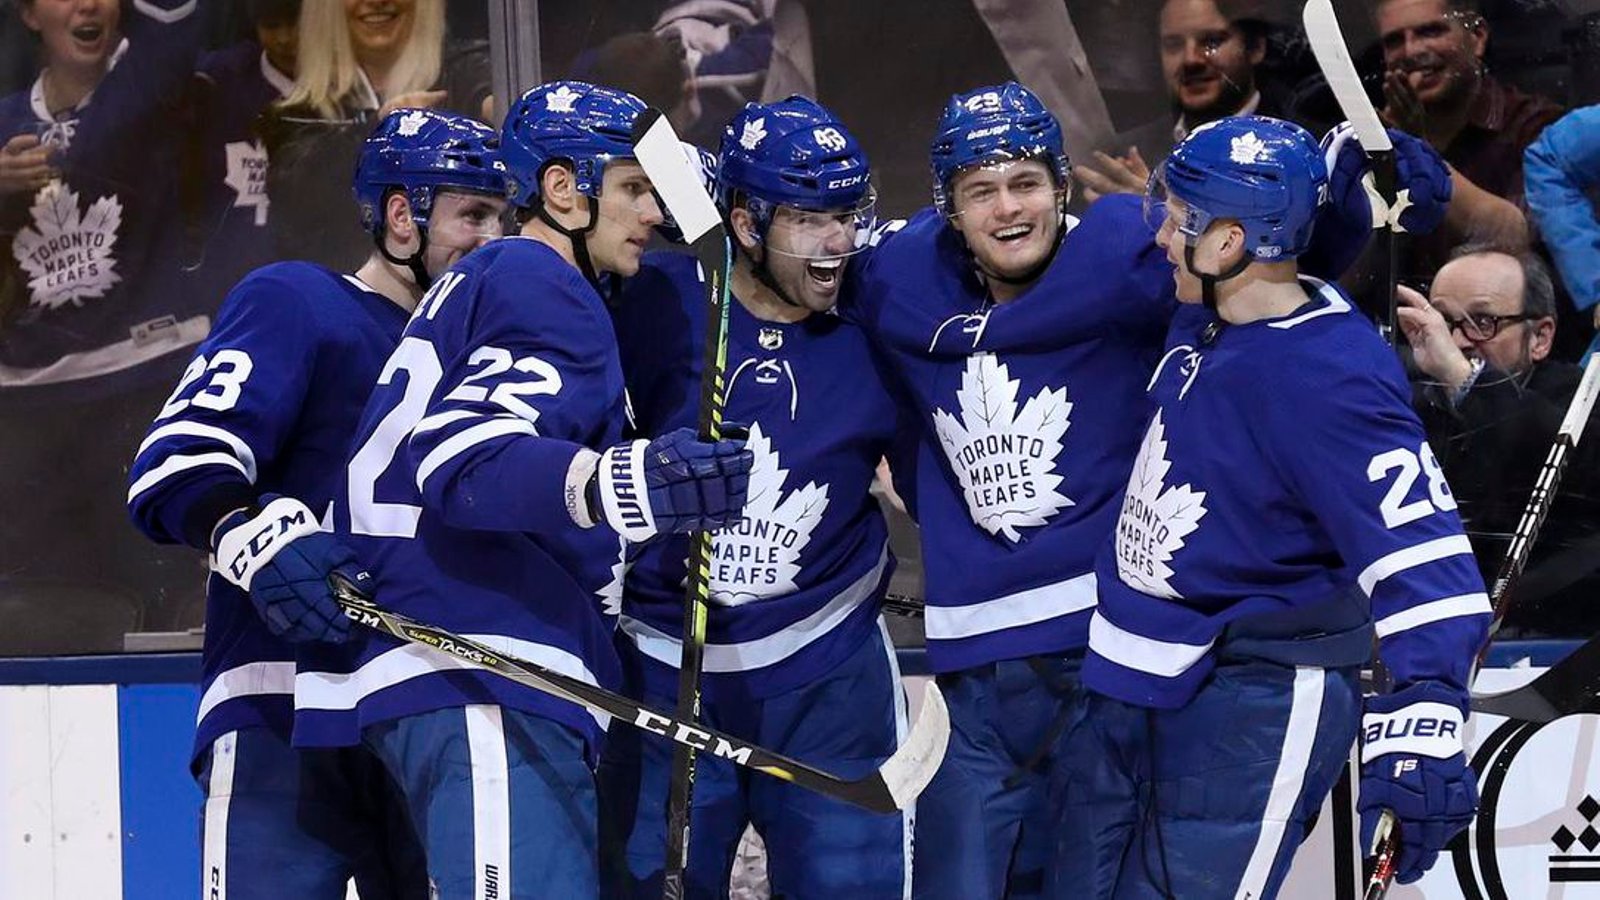 TSN’s Gord Miller bets his house that this Leafs blockbuster trade will happen! 